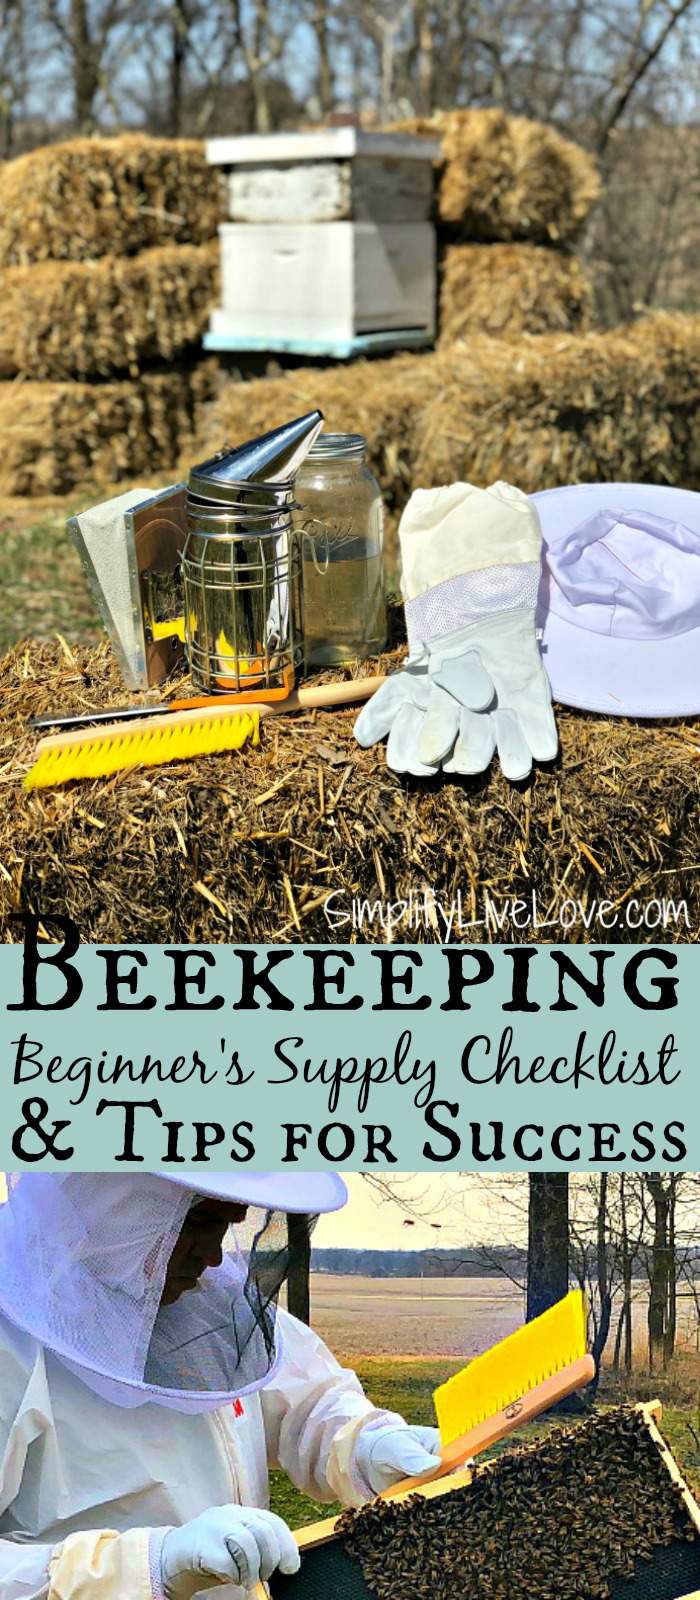 If you want to learn how to start beekeeping, here's a helpful list of beginning beekeeping supplies you'll need for beehive kits plus a few tips and tricks to survive the first week with your bees. #beekeeping